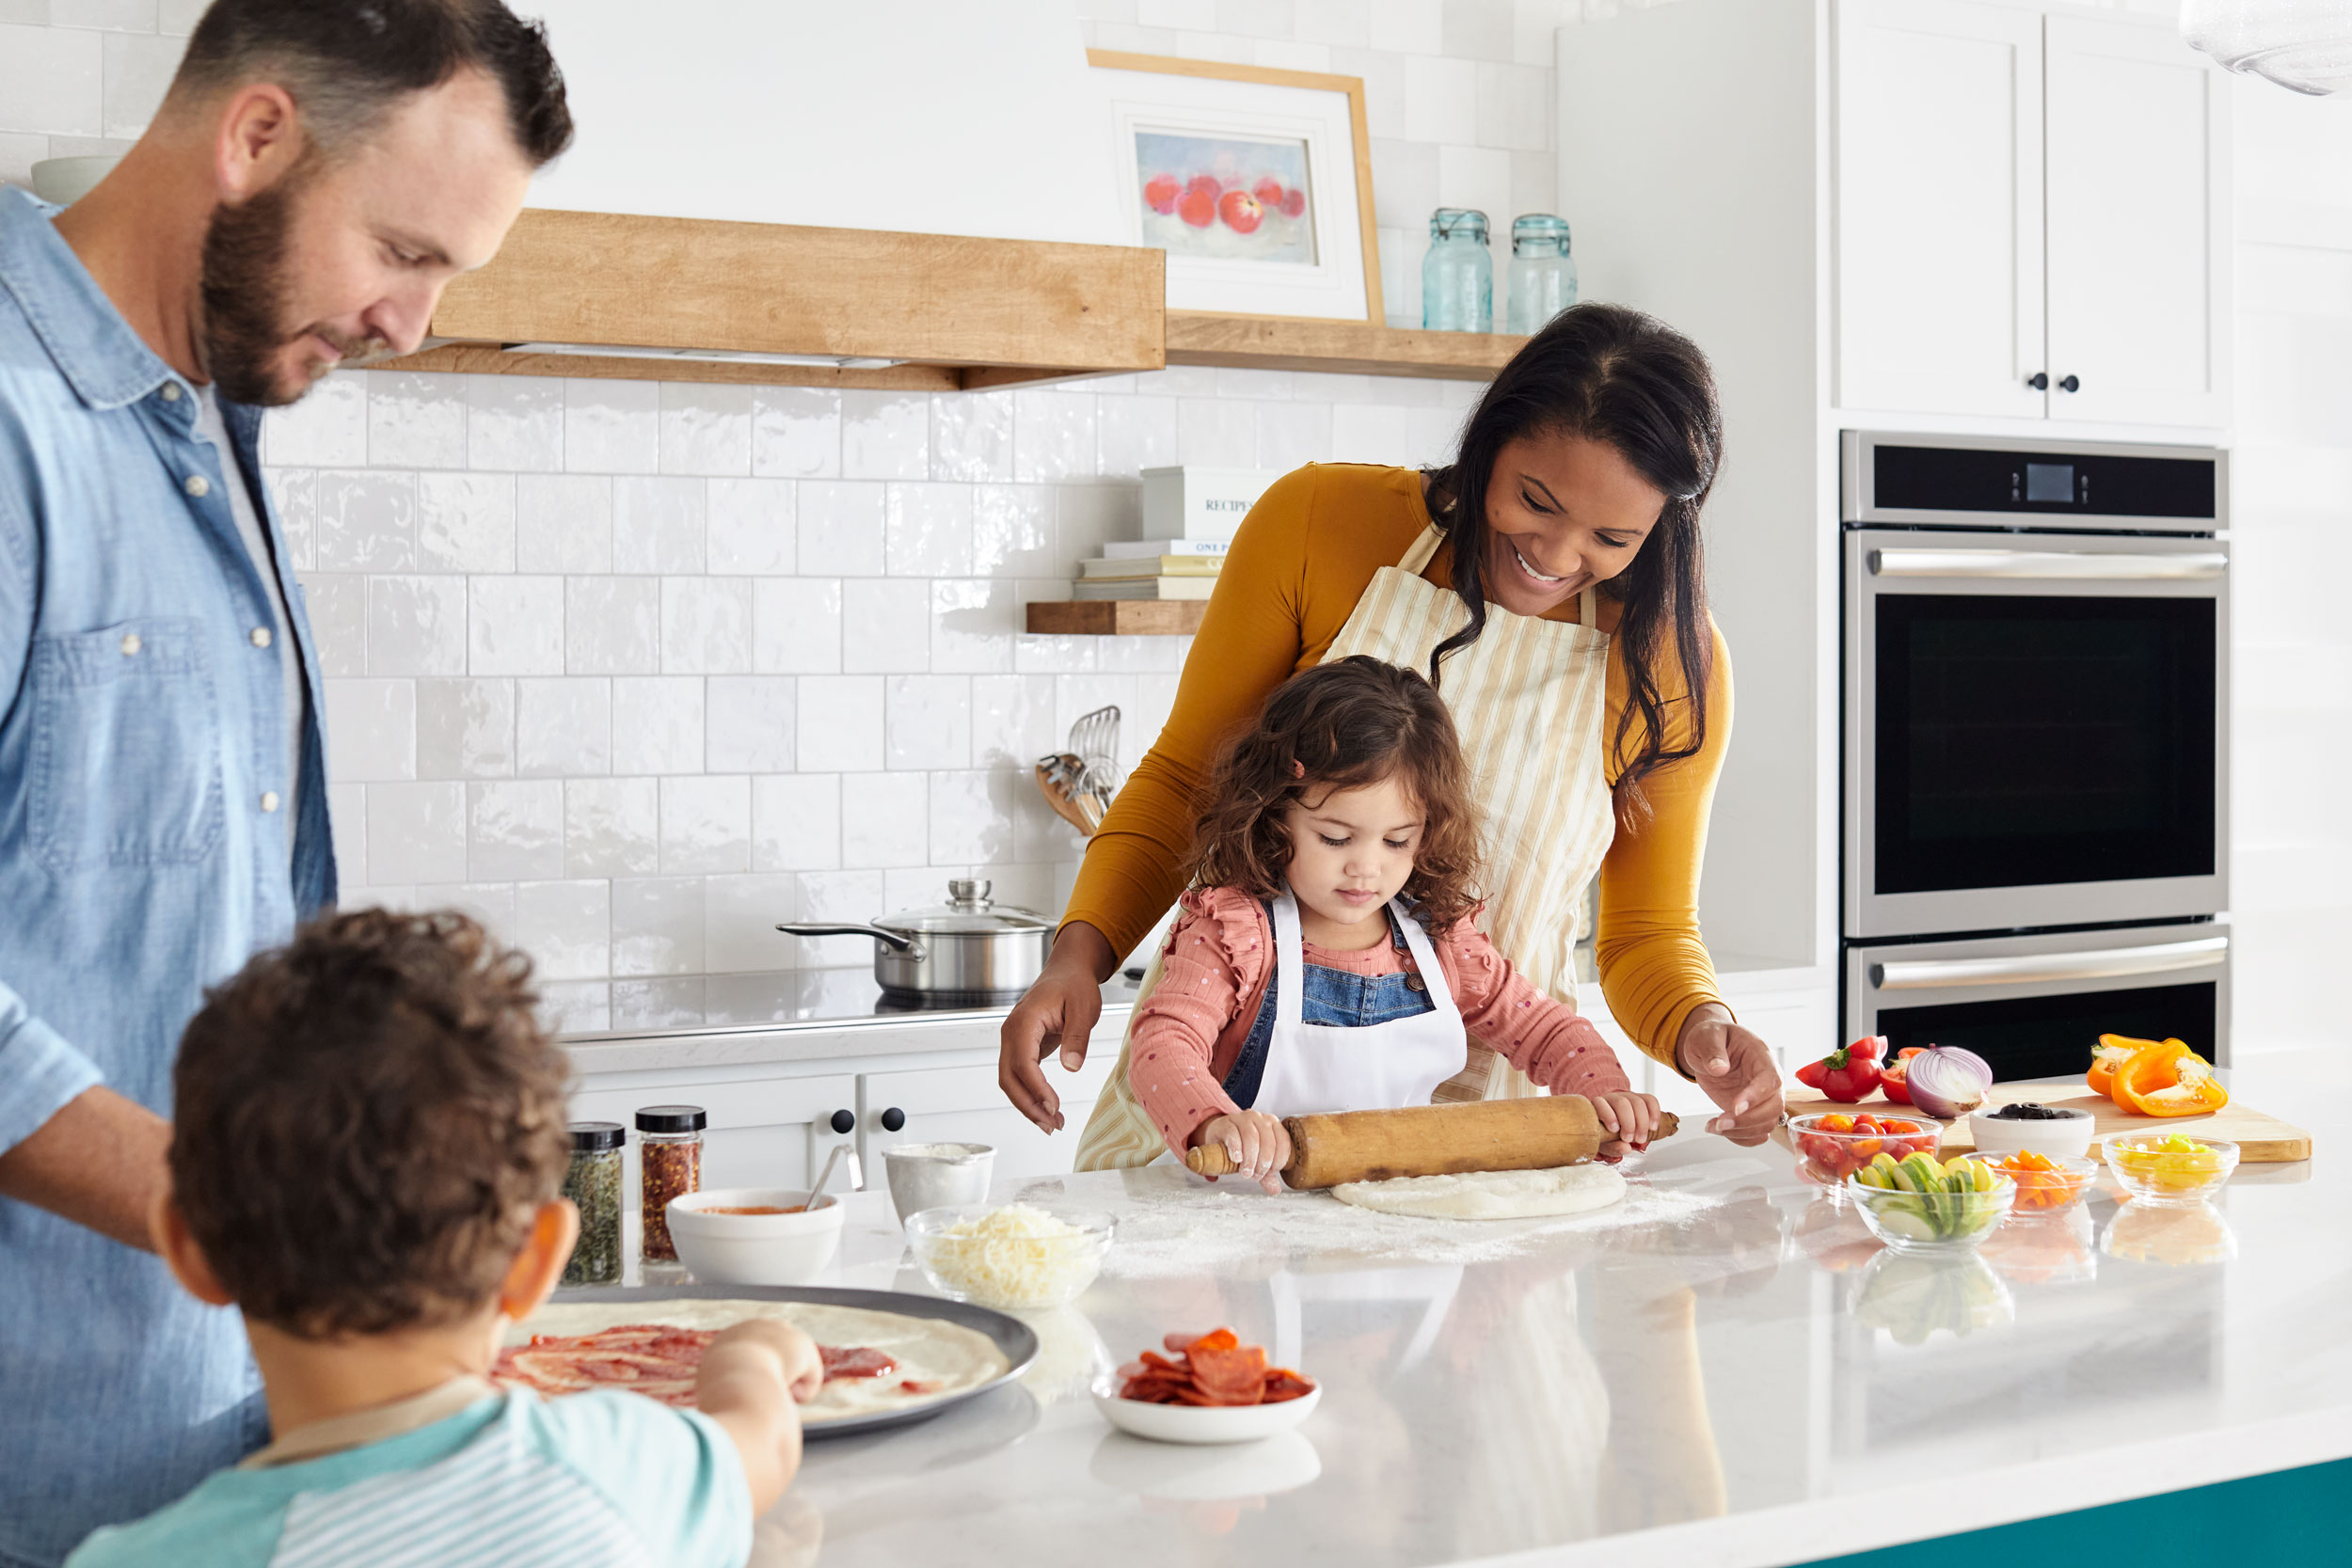 famly-making-pizza-in-kitchen-dc-commercial-photography